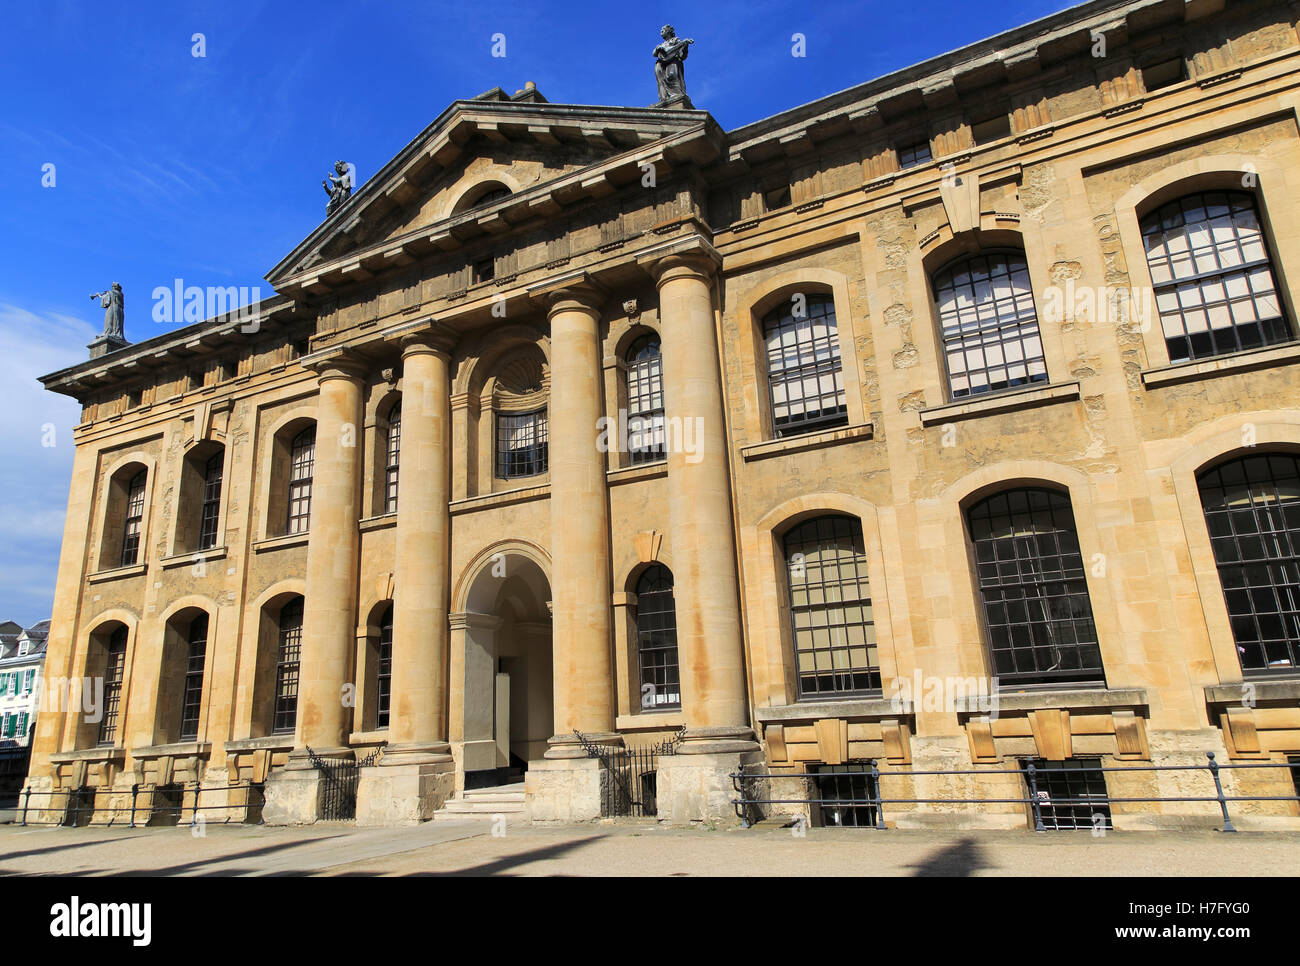 Clarendon Building, early 18th-century neoclassical building, University of Oxford, England, UK Stock Photo